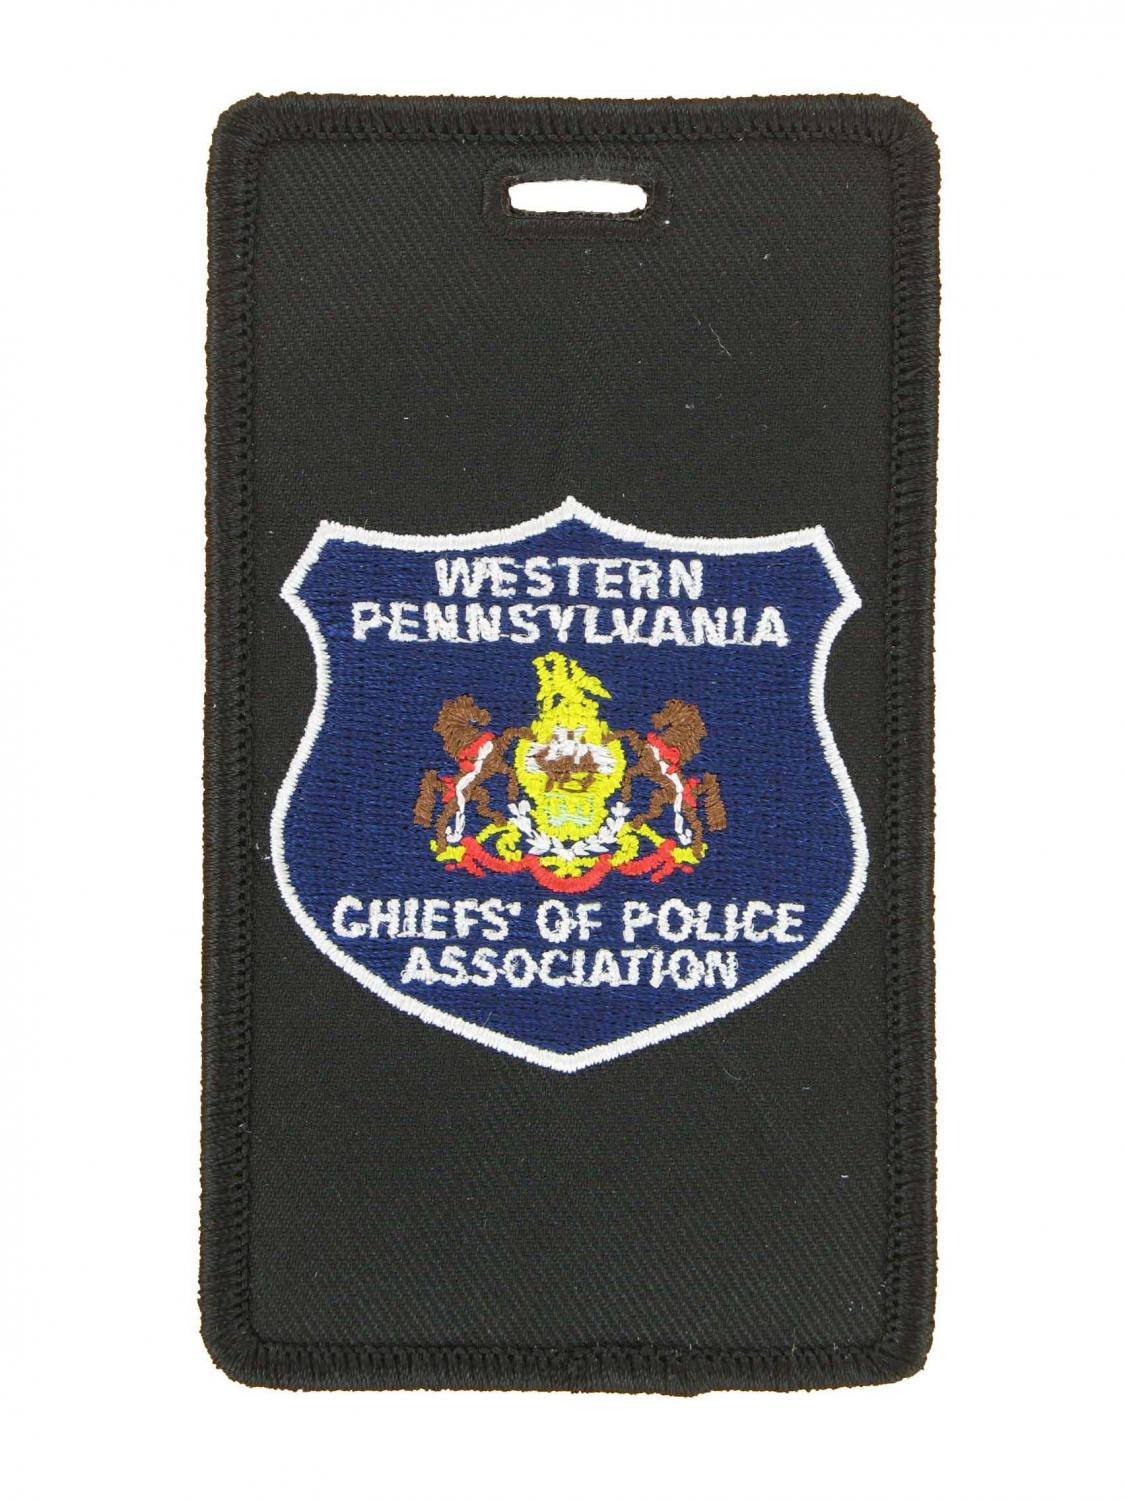 Police luggage tags